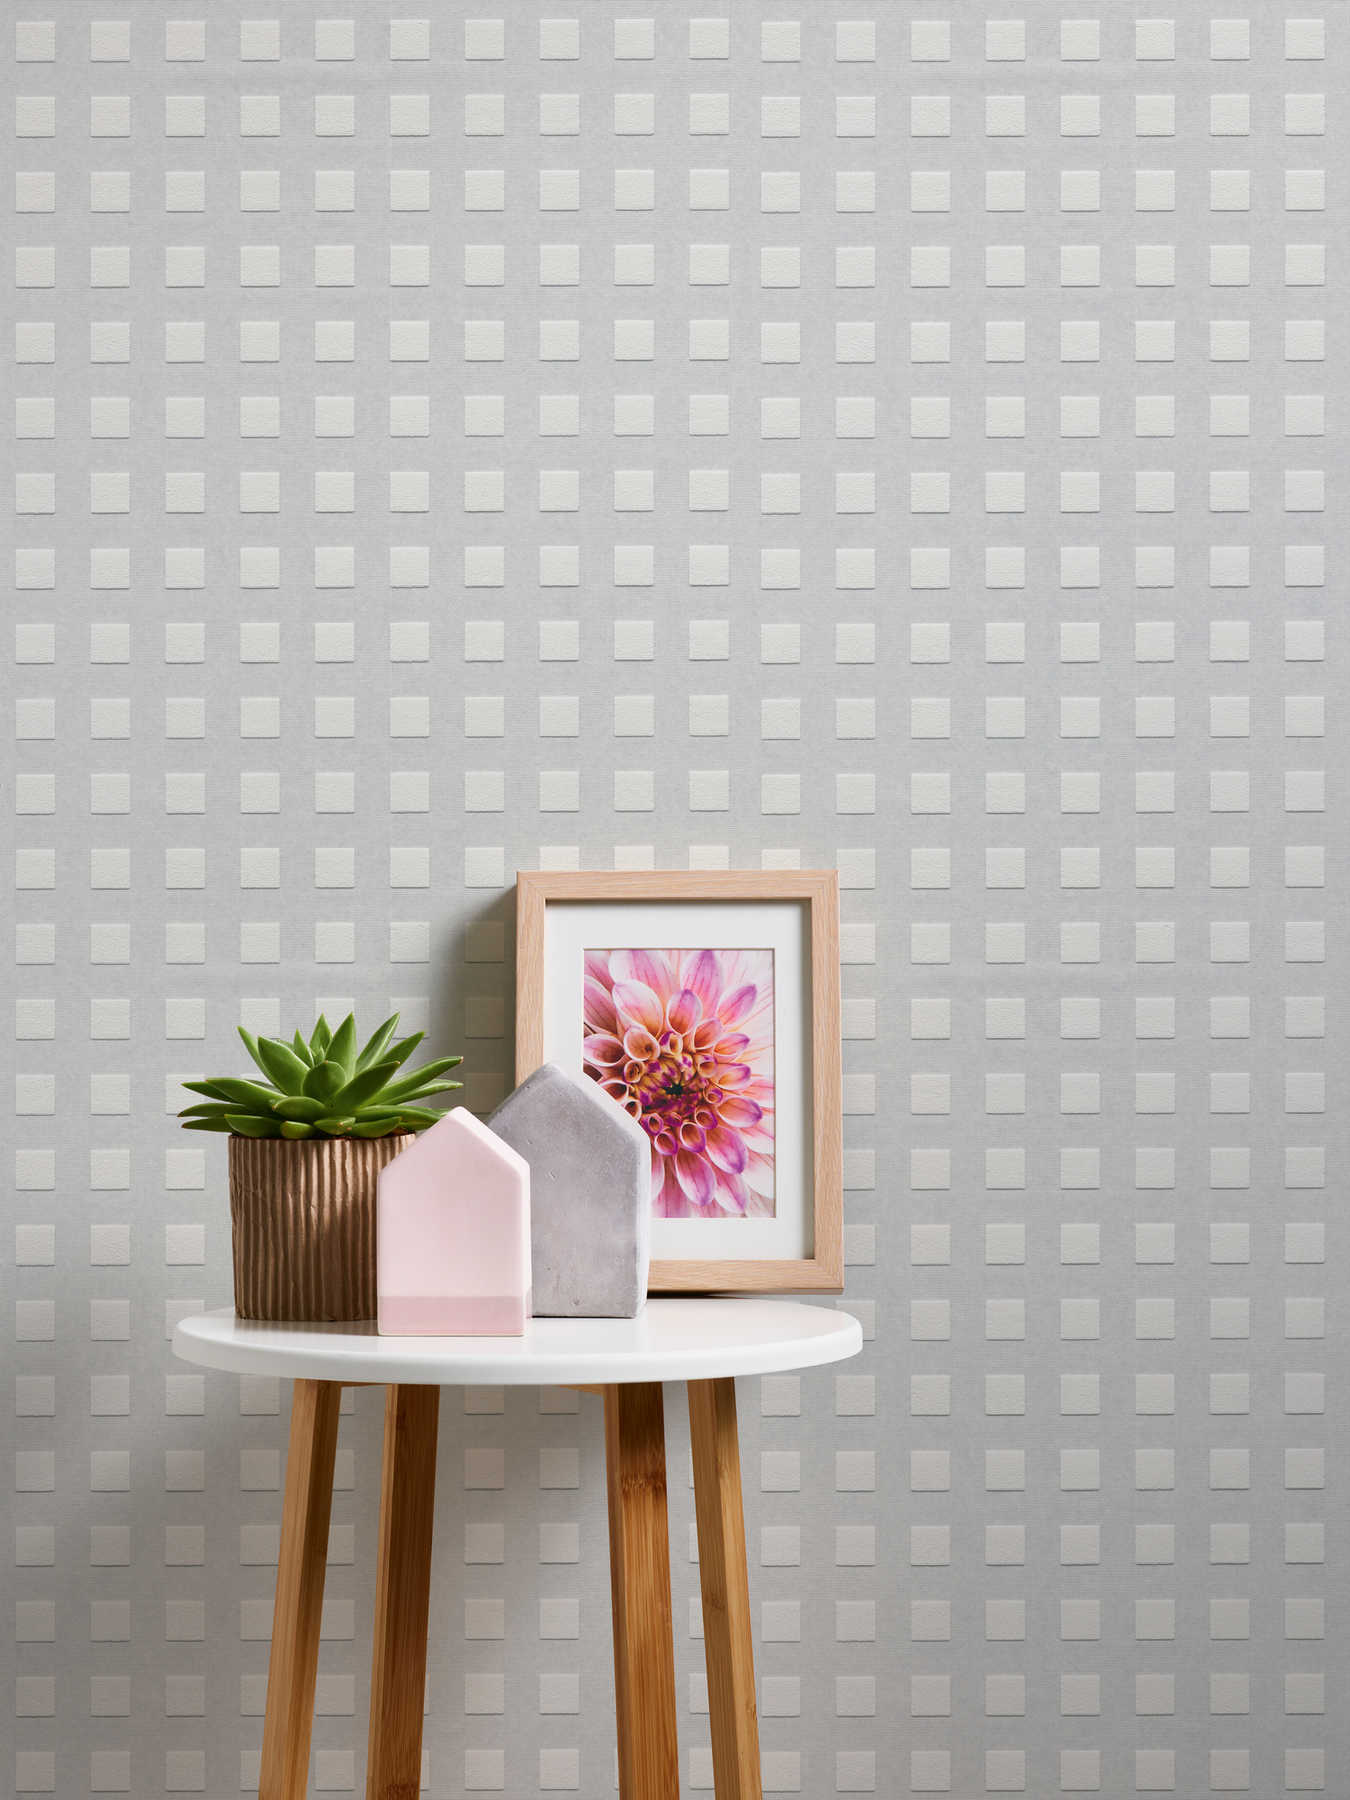             Paintable wallpaper with 3D effect & check pattern
        